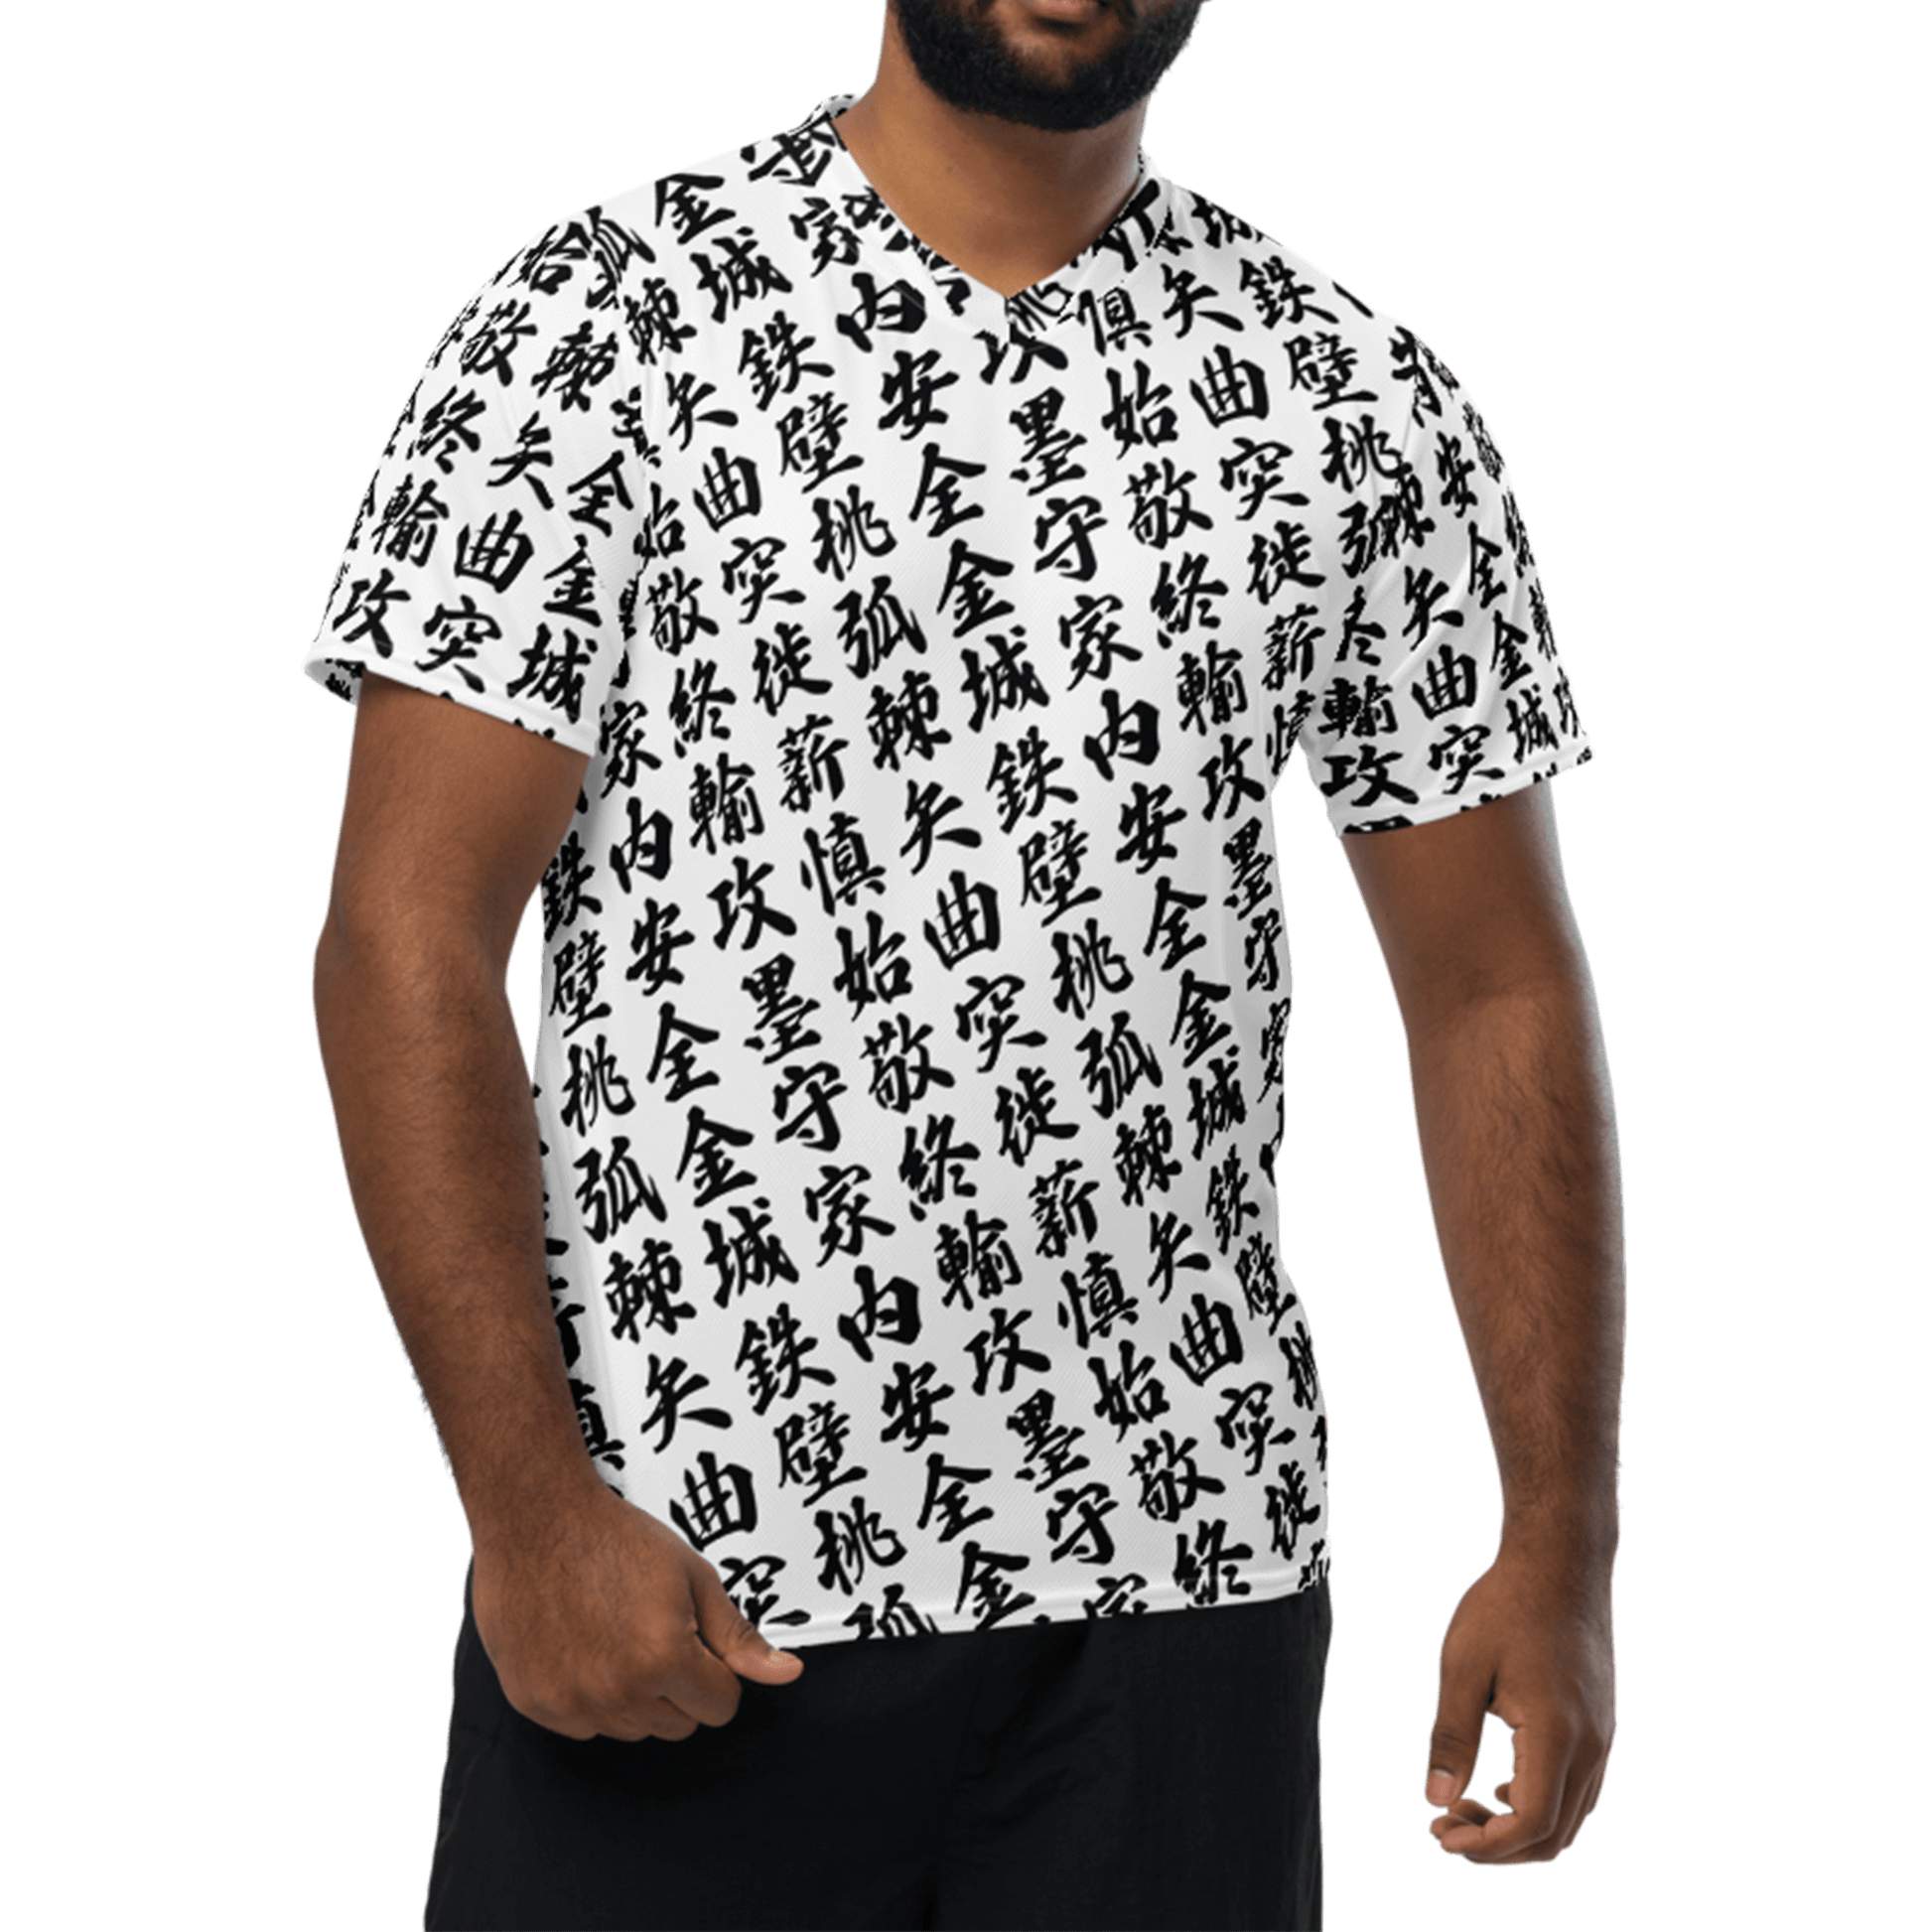 Unisex white Sports Jersey with all-over print in Japanese KANJI